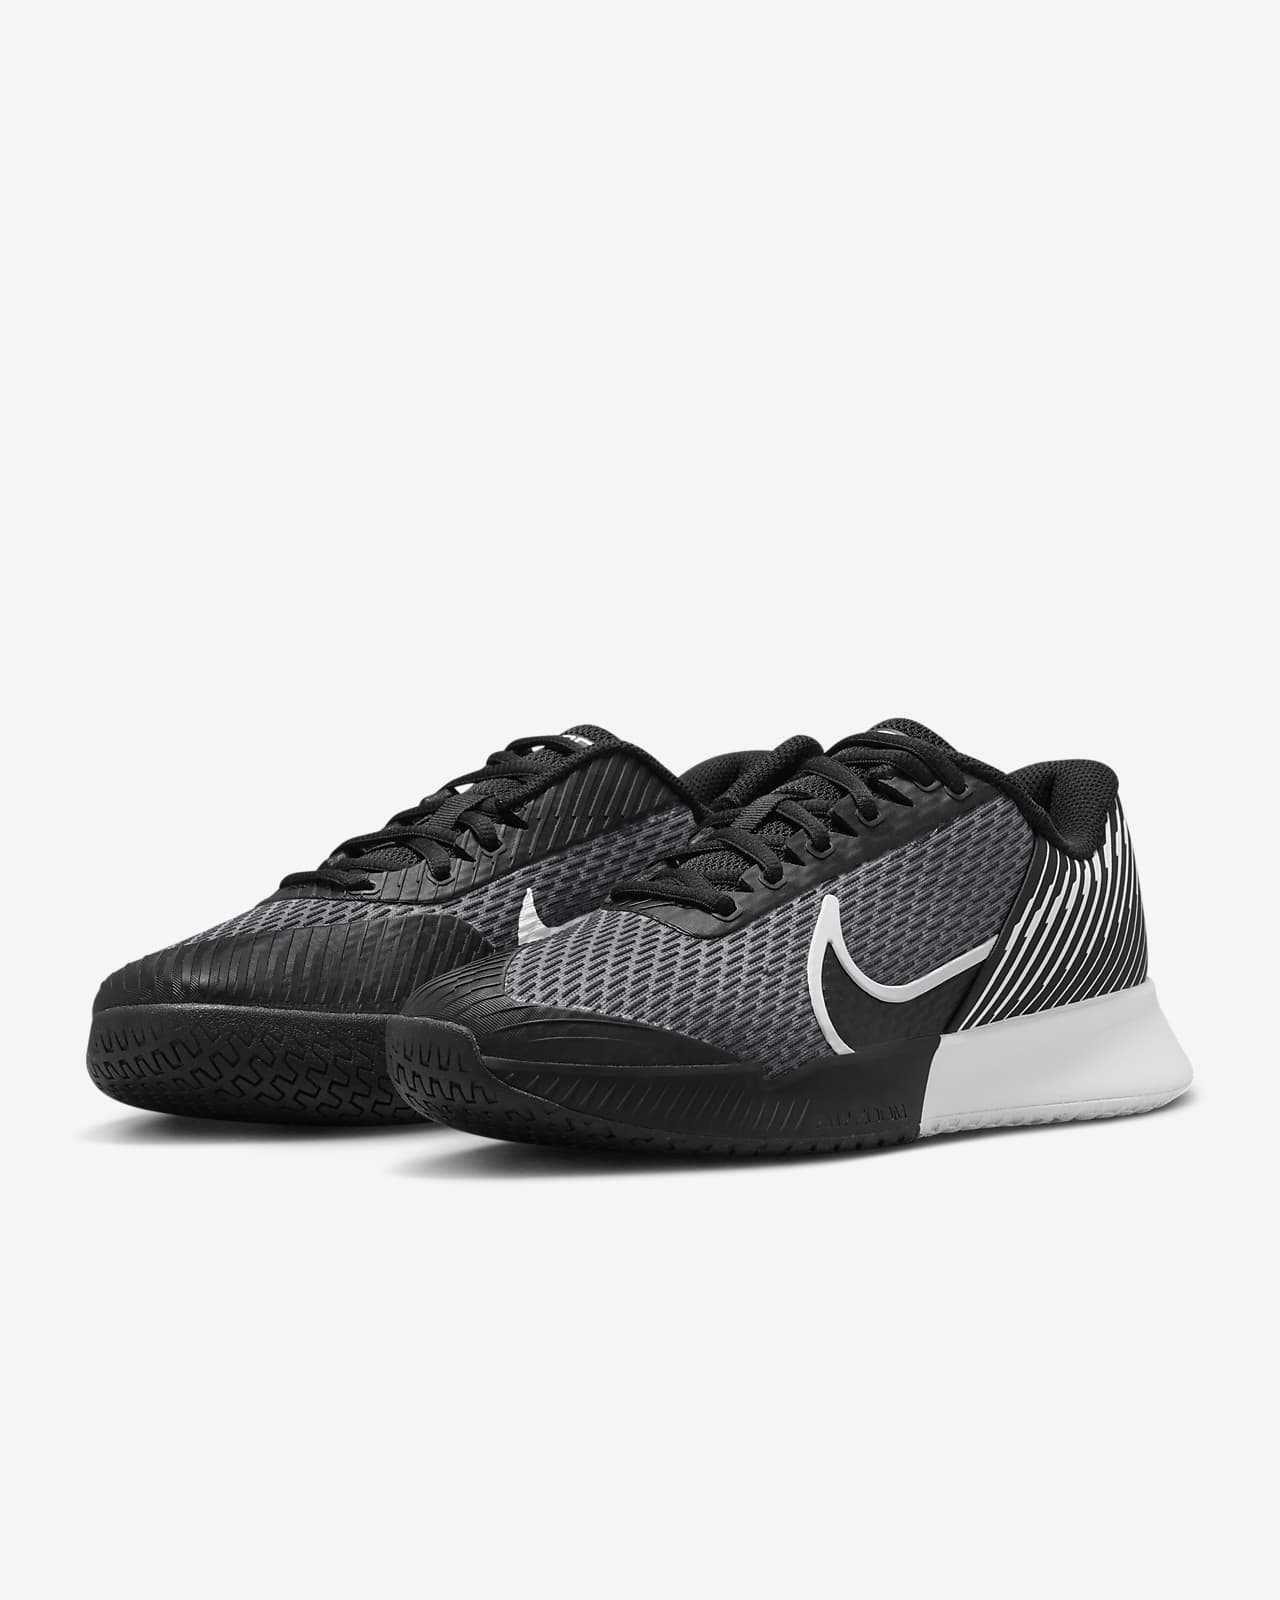 CHAUSSURES NIKE FEMME AIR ZOOM COURT PRO TERRE BATTUE - NIKE